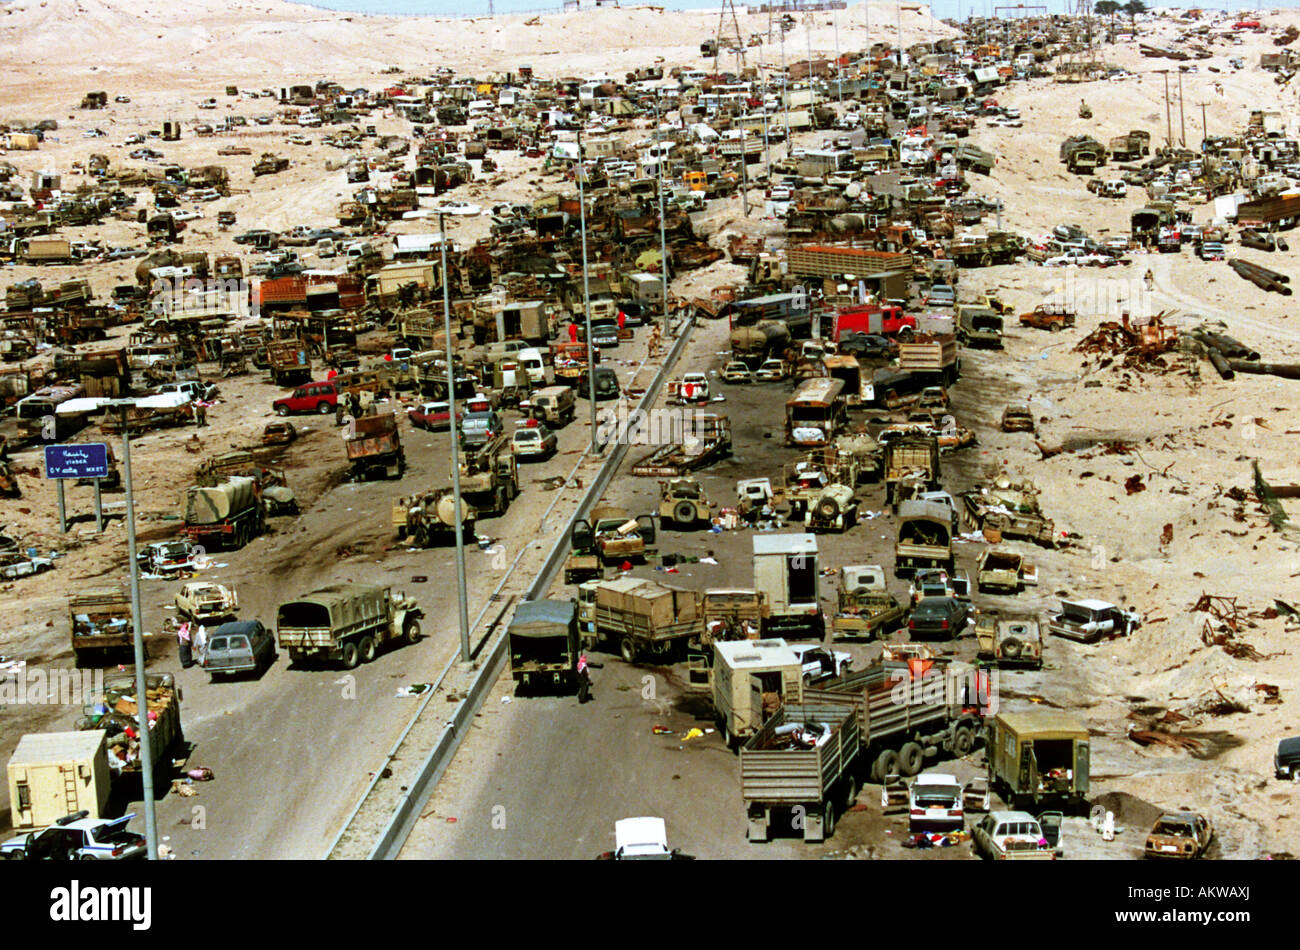 the-highway-of-death-a-highway-to-the-north-of-kuwait-city-that-leads-AKWAXJ.jpg